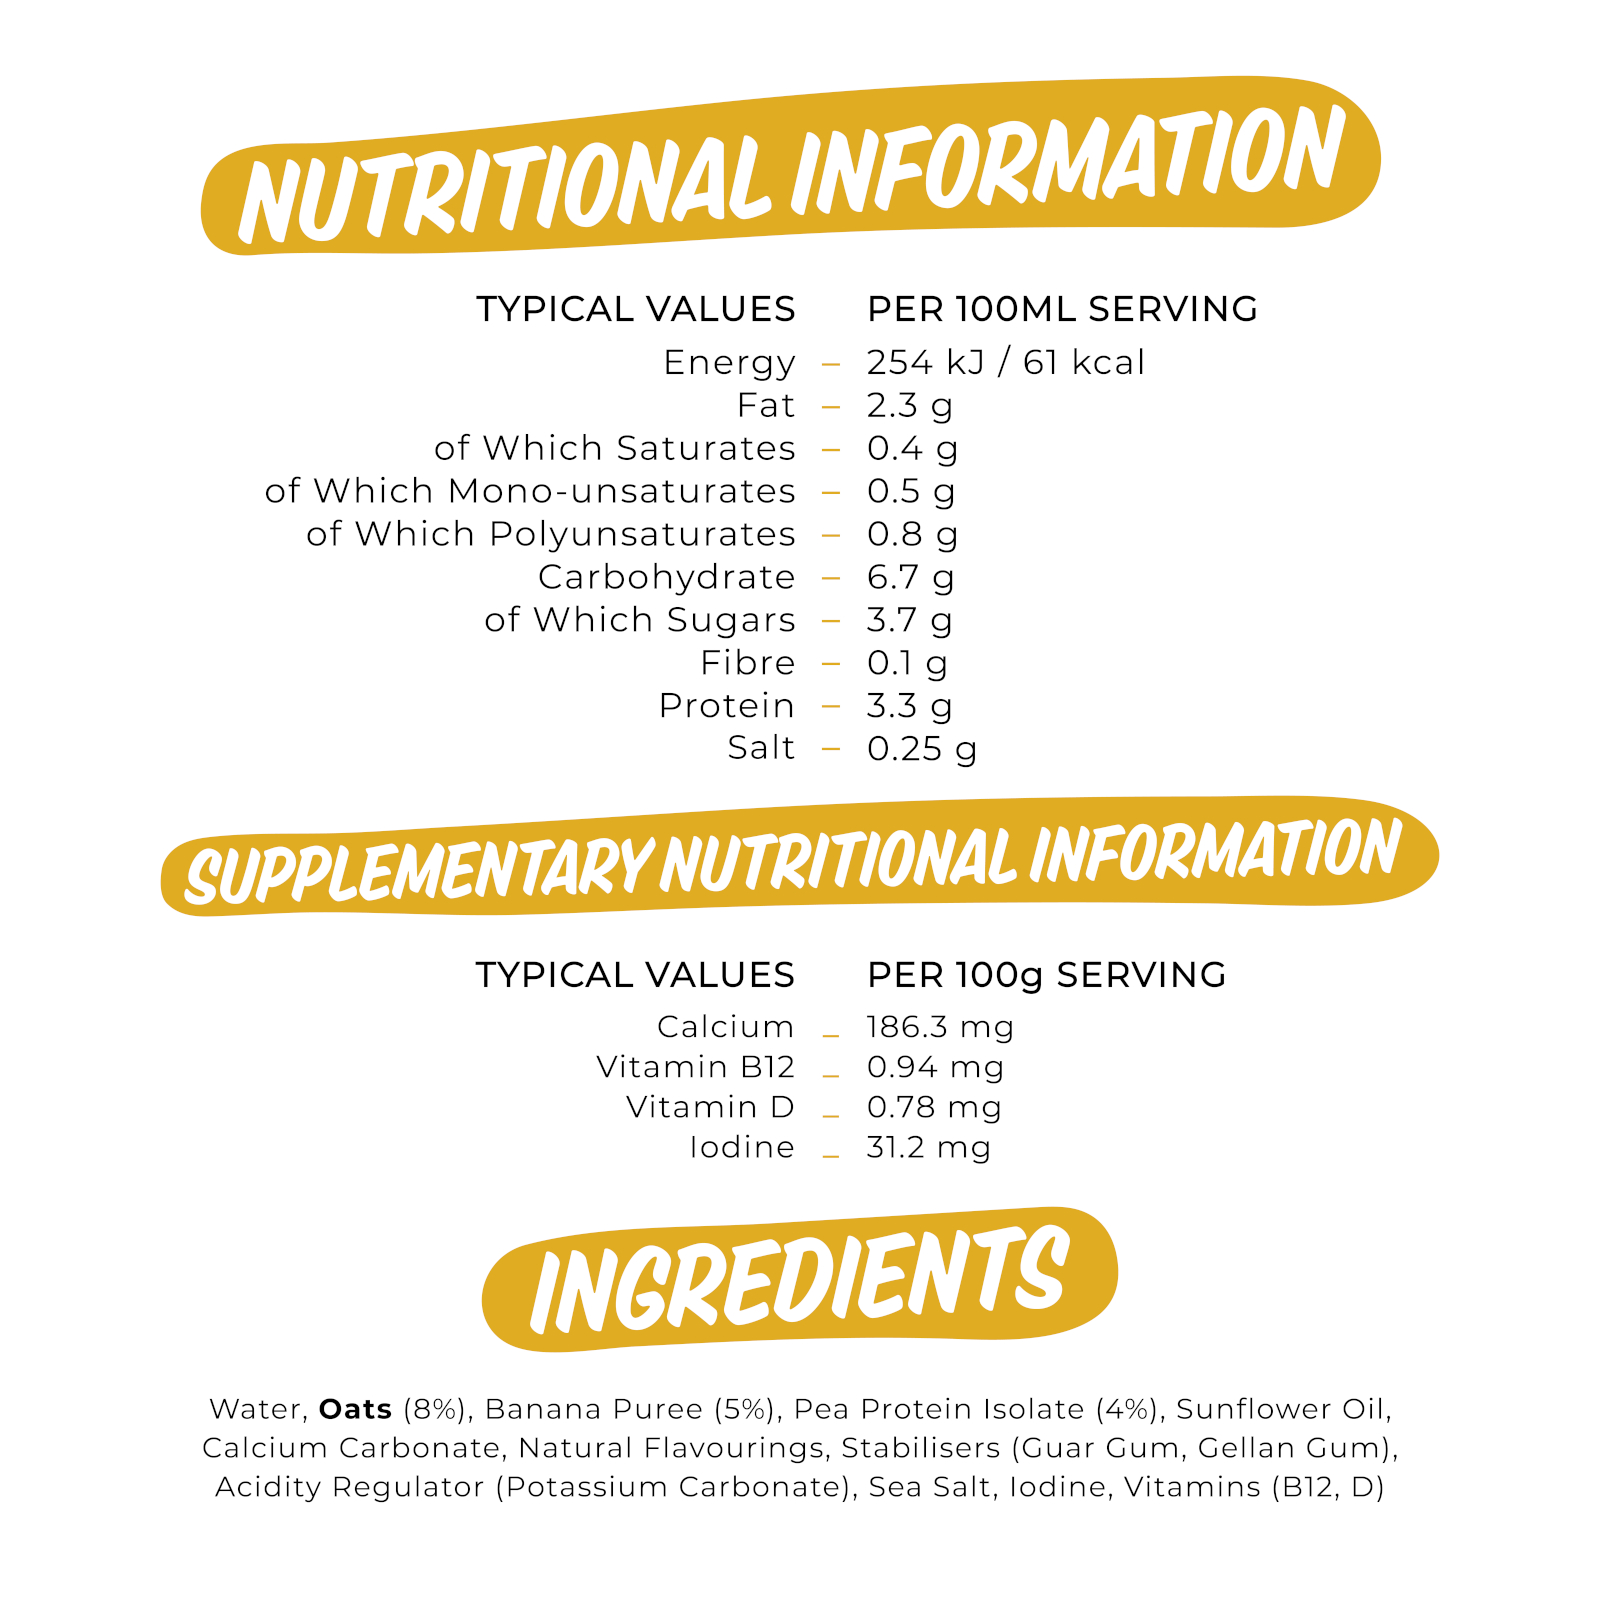 TYPICAL VALUES PER 100ML SERVING Energy - 254 kJ / 61 kcal Fat 2.3 g of Which Saturates 0.4 g of Which Mono-unsaturates 0.5 g of Which Polyunsaturates - 0.8 g Carbohydrate - 6.7 g of Which Sugars 3.7 g Fibre 0.1 g Protein - 3.3 g Salt 0.25 g 
                          SUPPLEMENTARY NUTRITIONAL INFORMATION TYPICAL VALUES PER 100g SERVING Calcium _ 186.3 mg Vitamin B12 _ 0.94 mg Vitamin D _ 0.78 mg Iodine _ 31.2 mg 
                          Water, Oats (8%), Banana Puree (5%), Pea Protein Isolate (4%), Sunflower Oil, Calcium Carbonate, Natural Flavourings, Stabilisers (Guar Gum, Gellan Gum), Acidity Regulator (Potassium Carbonate), Sea Salt, Iodine, Vitamins (B12, D) 

                          